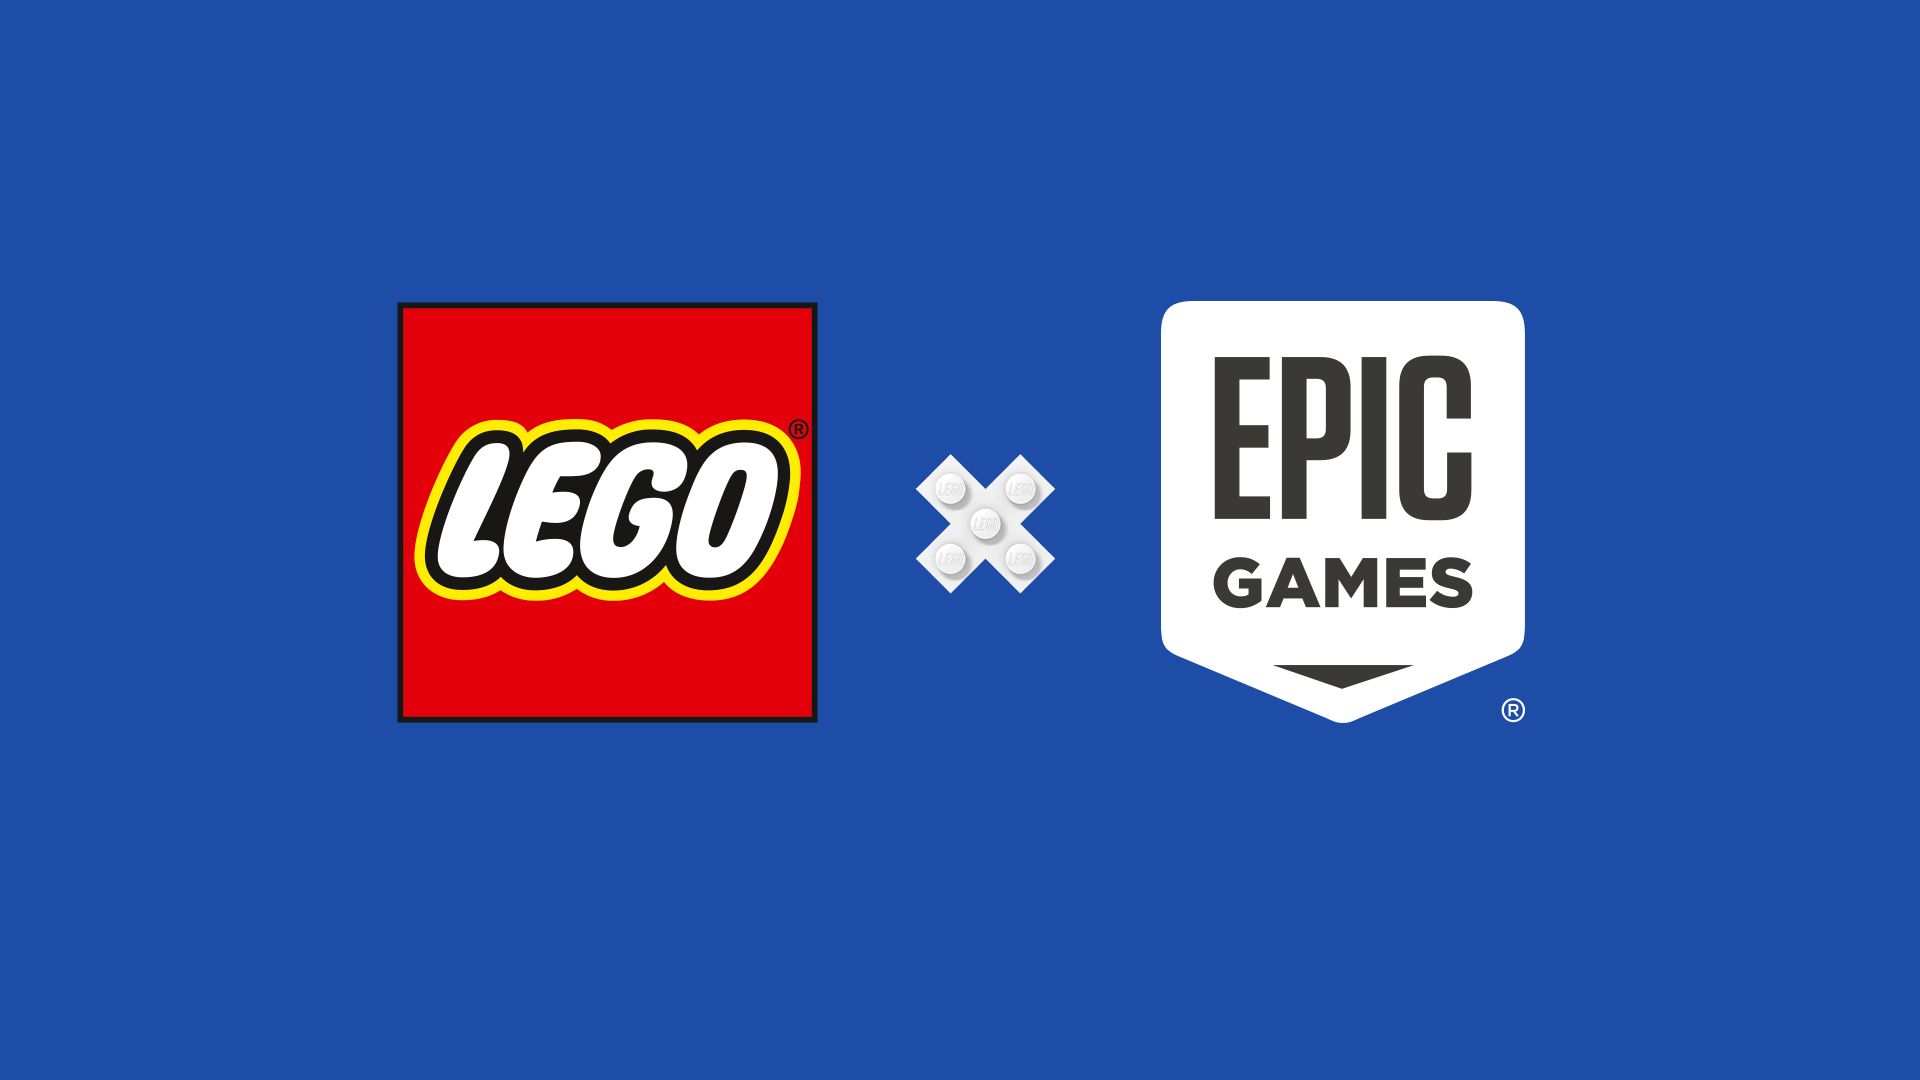 Image of the Lego and Epic Games logos